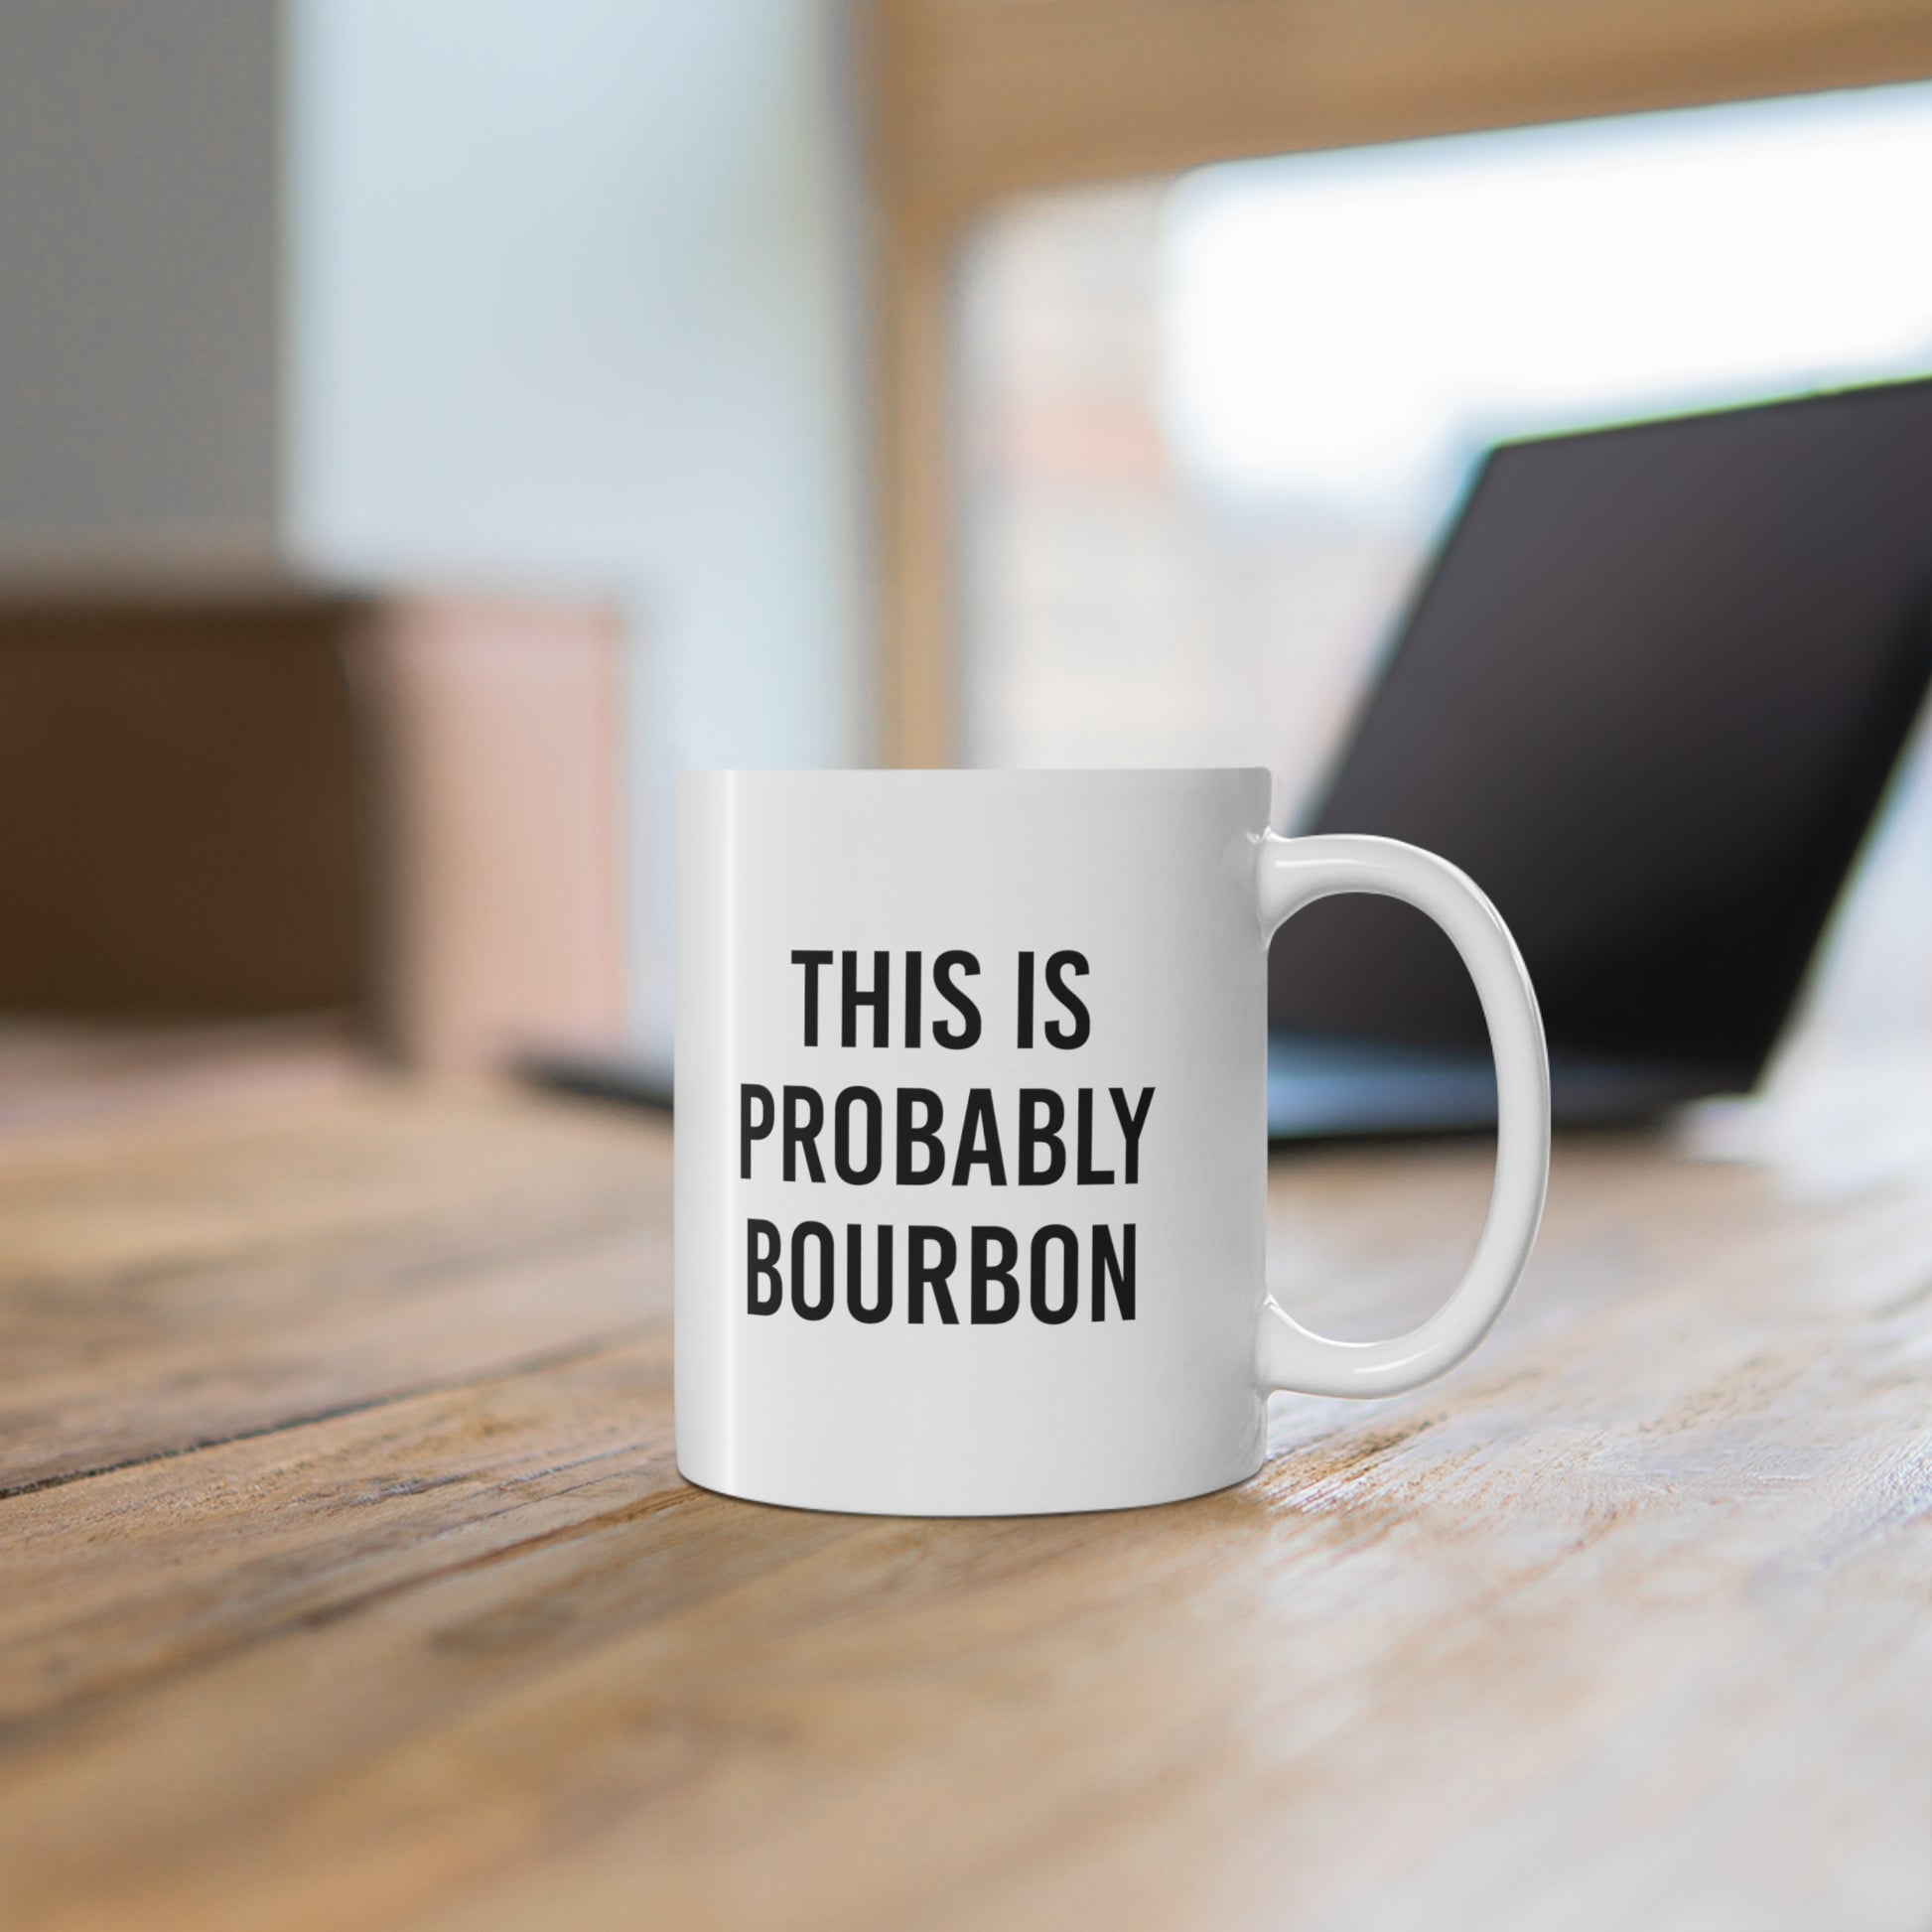 11oz ceramic mug with quote This is probably bourbon